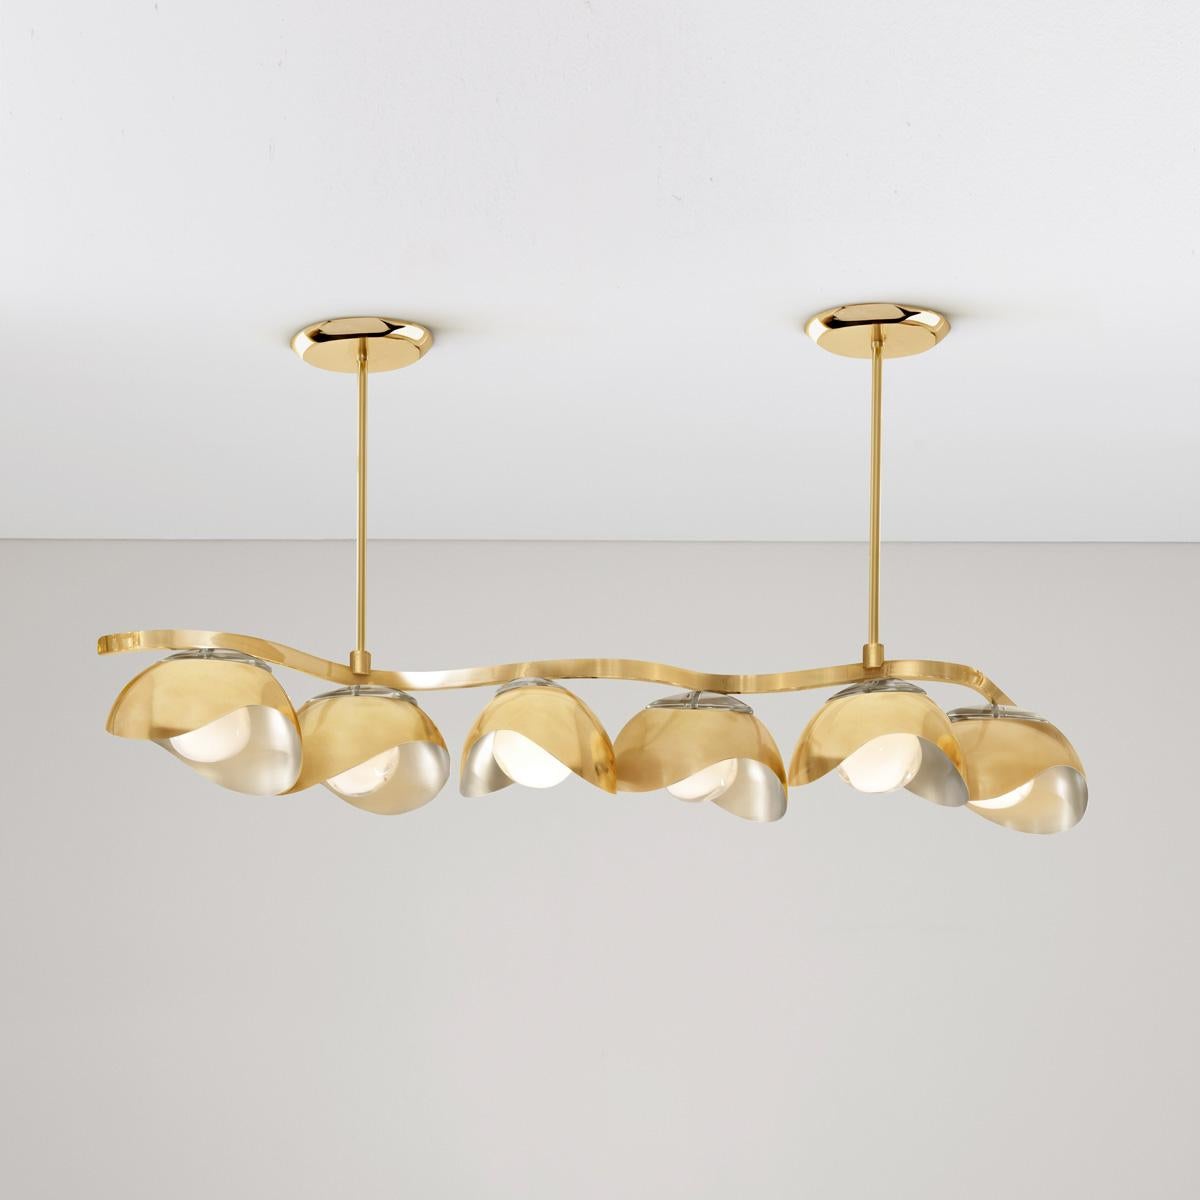 Serpente Ceiling Light by Gaspare Asaro- Bronze and Satin Brass Finish For Sale 2